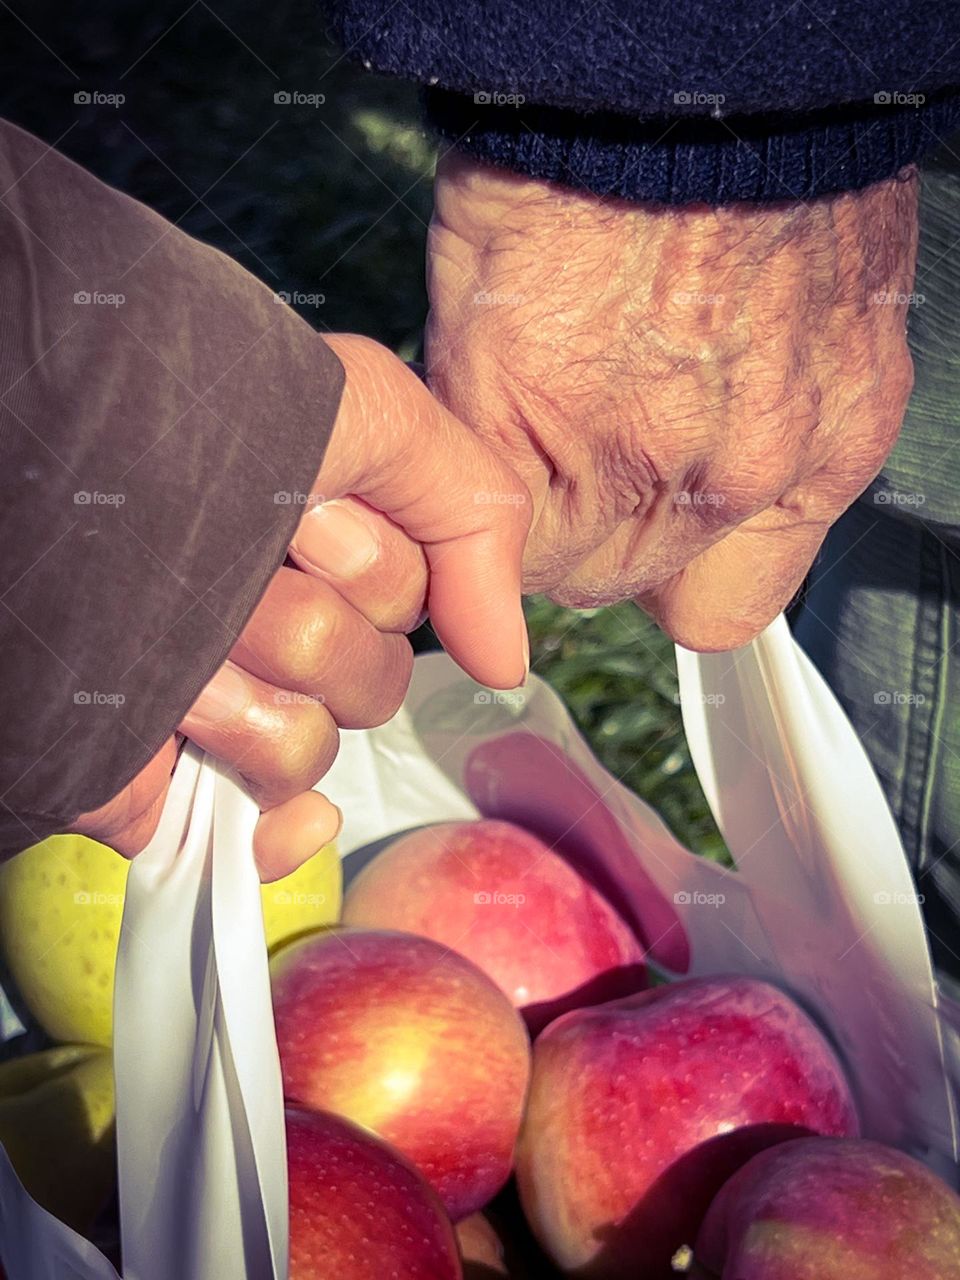 Two person carrying the apples